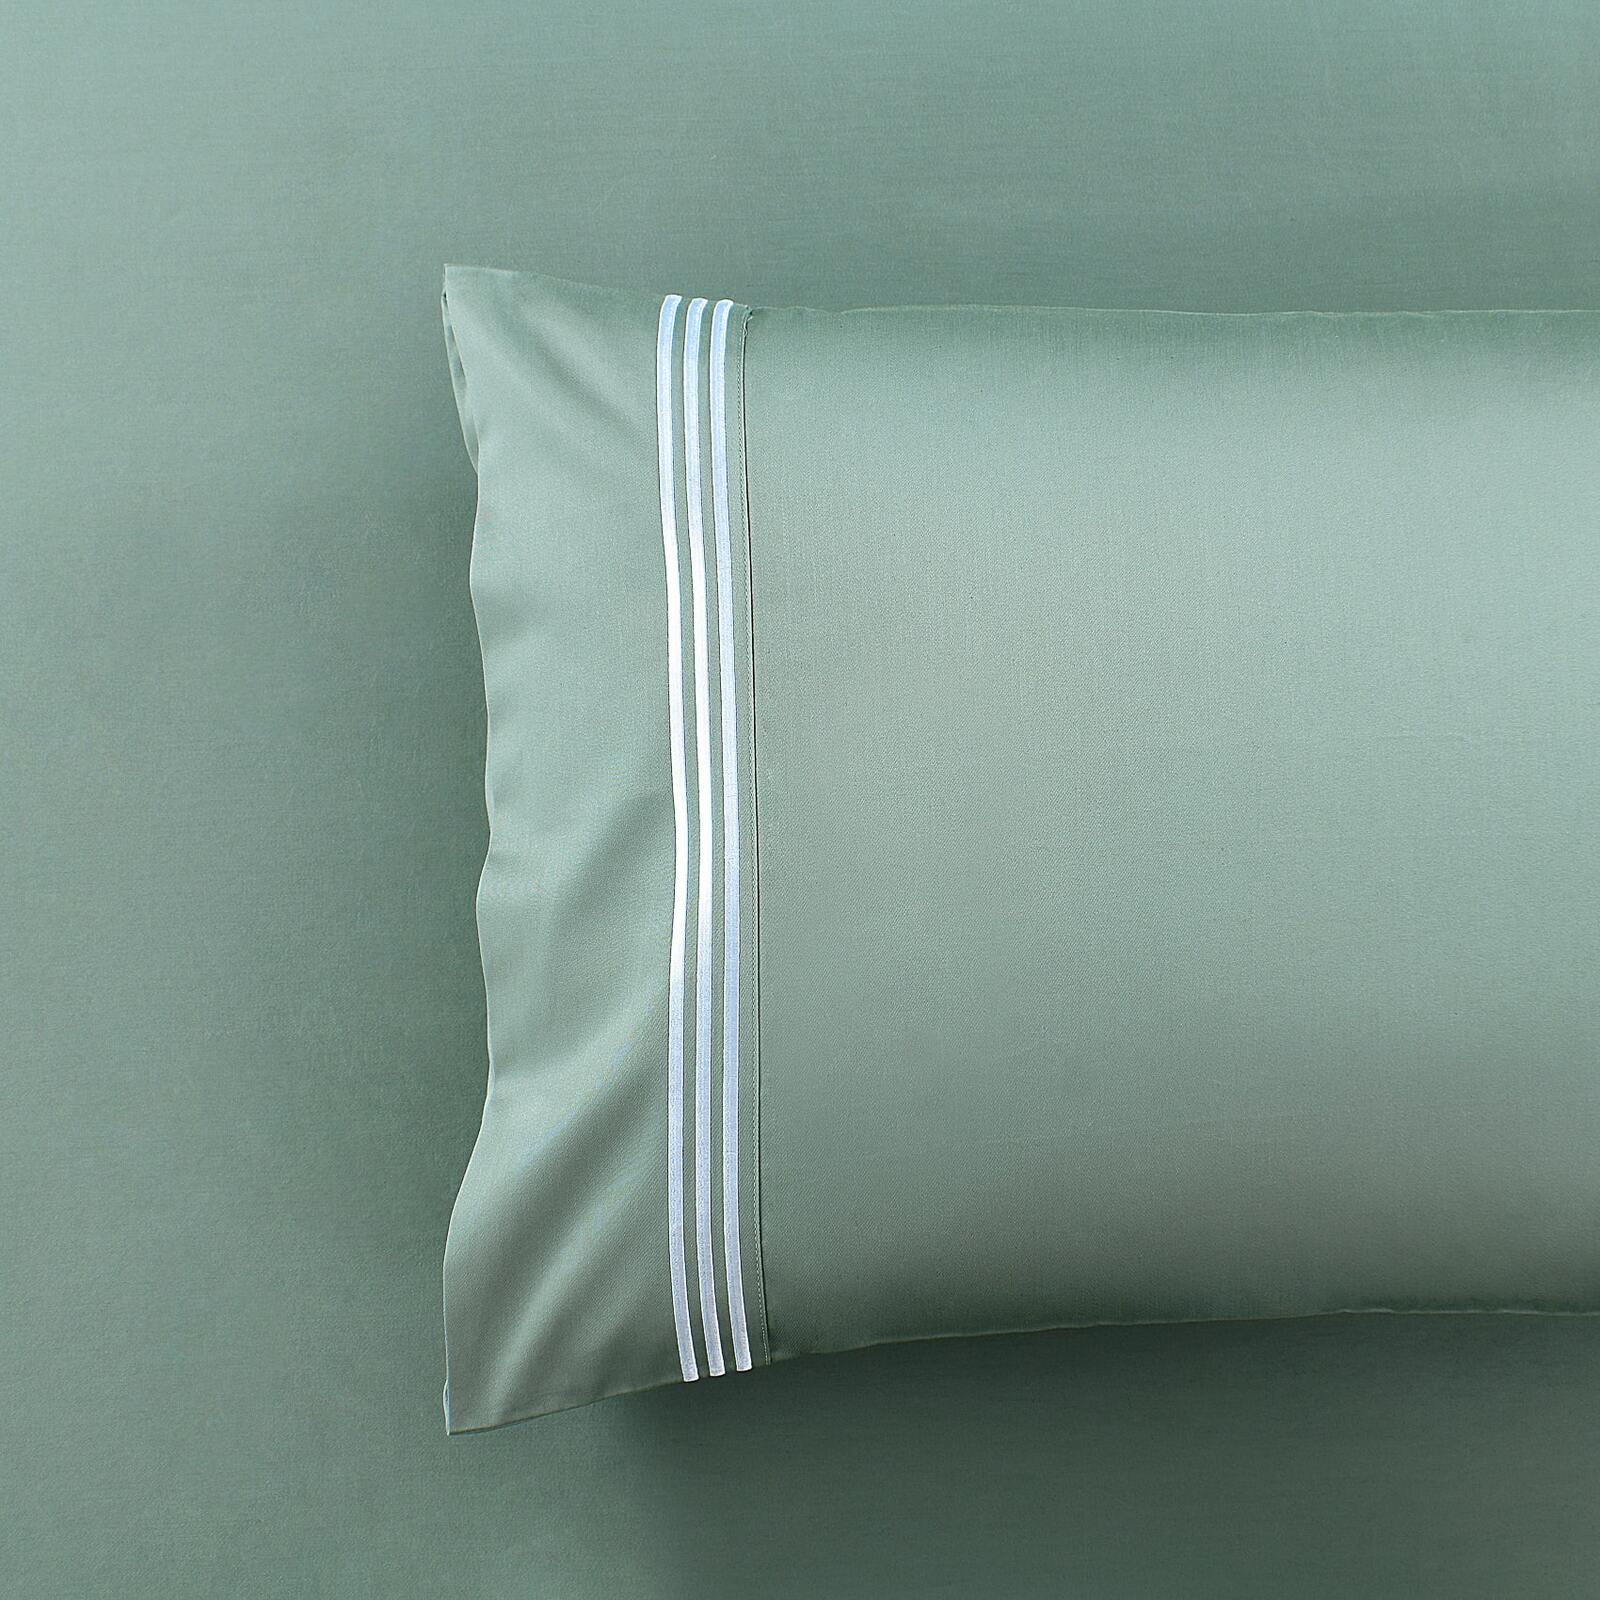 Hotel Luxe - White Embroidery on Green - 1000TC Quilt Cover Set